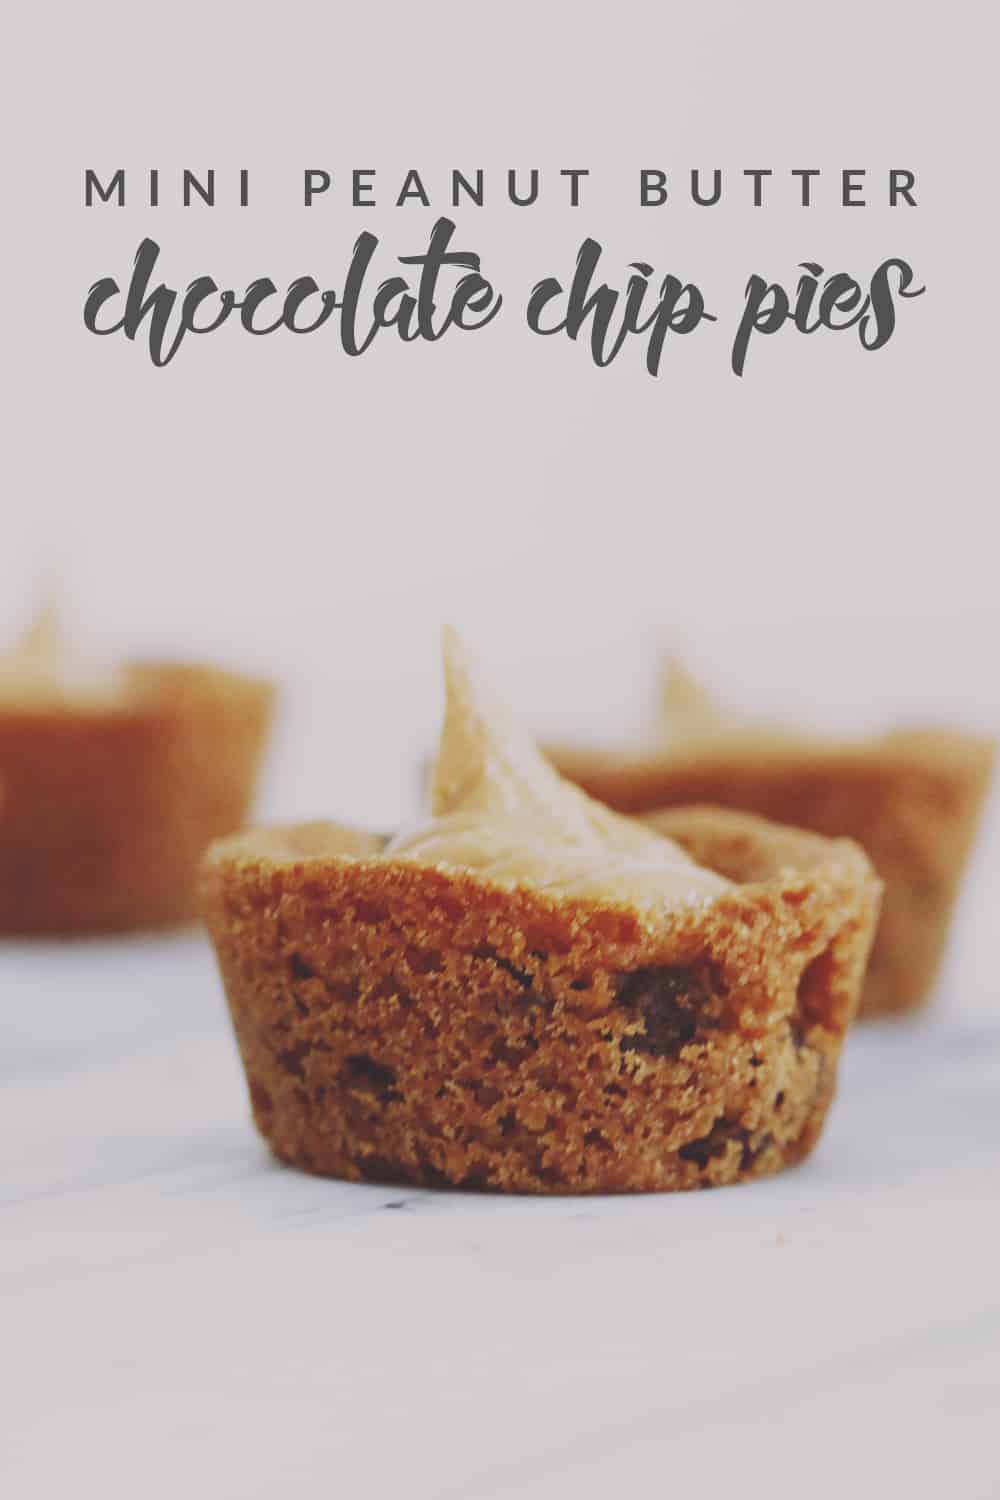 What could be better than peanut butter chocolate chip pies? Mini peanut butter chocolate chip pies! These little morsels are SUPER easy + delicious, too!